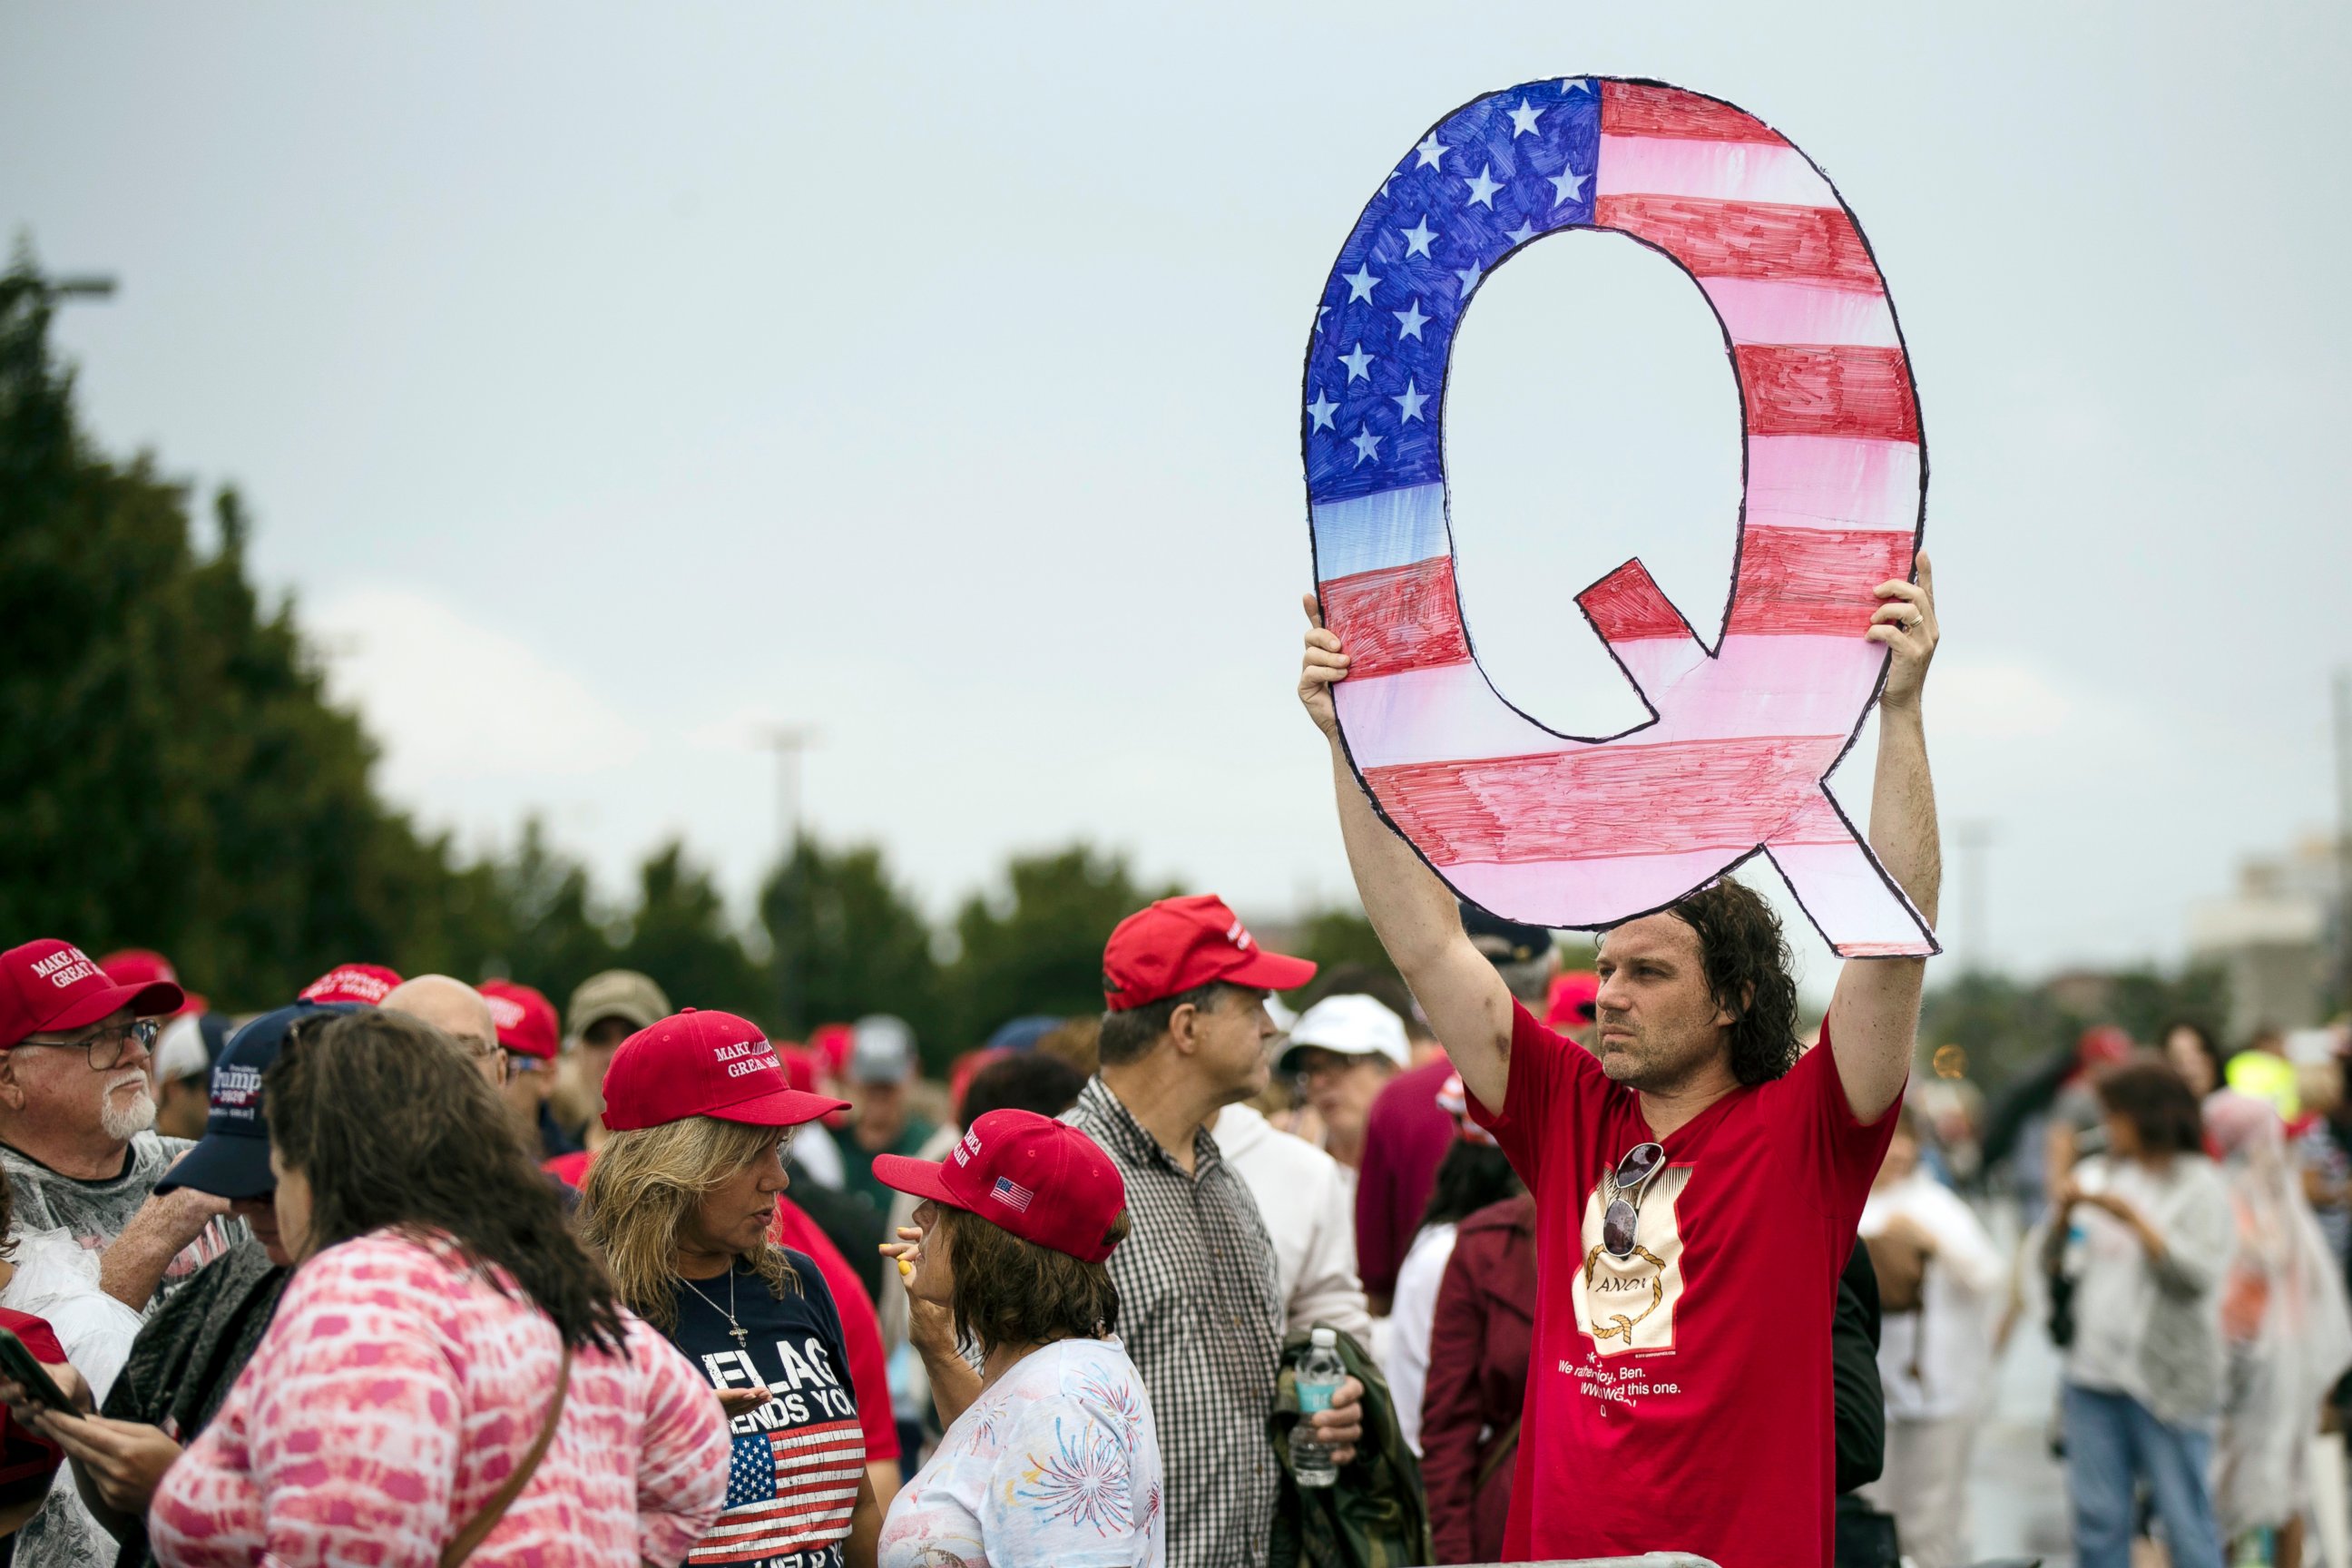 PHOTO: In this Aug. 2, 2018, file photo, a protesters holds a Q sign waits in line with others to enter a campaign rally with President Donald Trump in Wilkes-Barre, Pa.